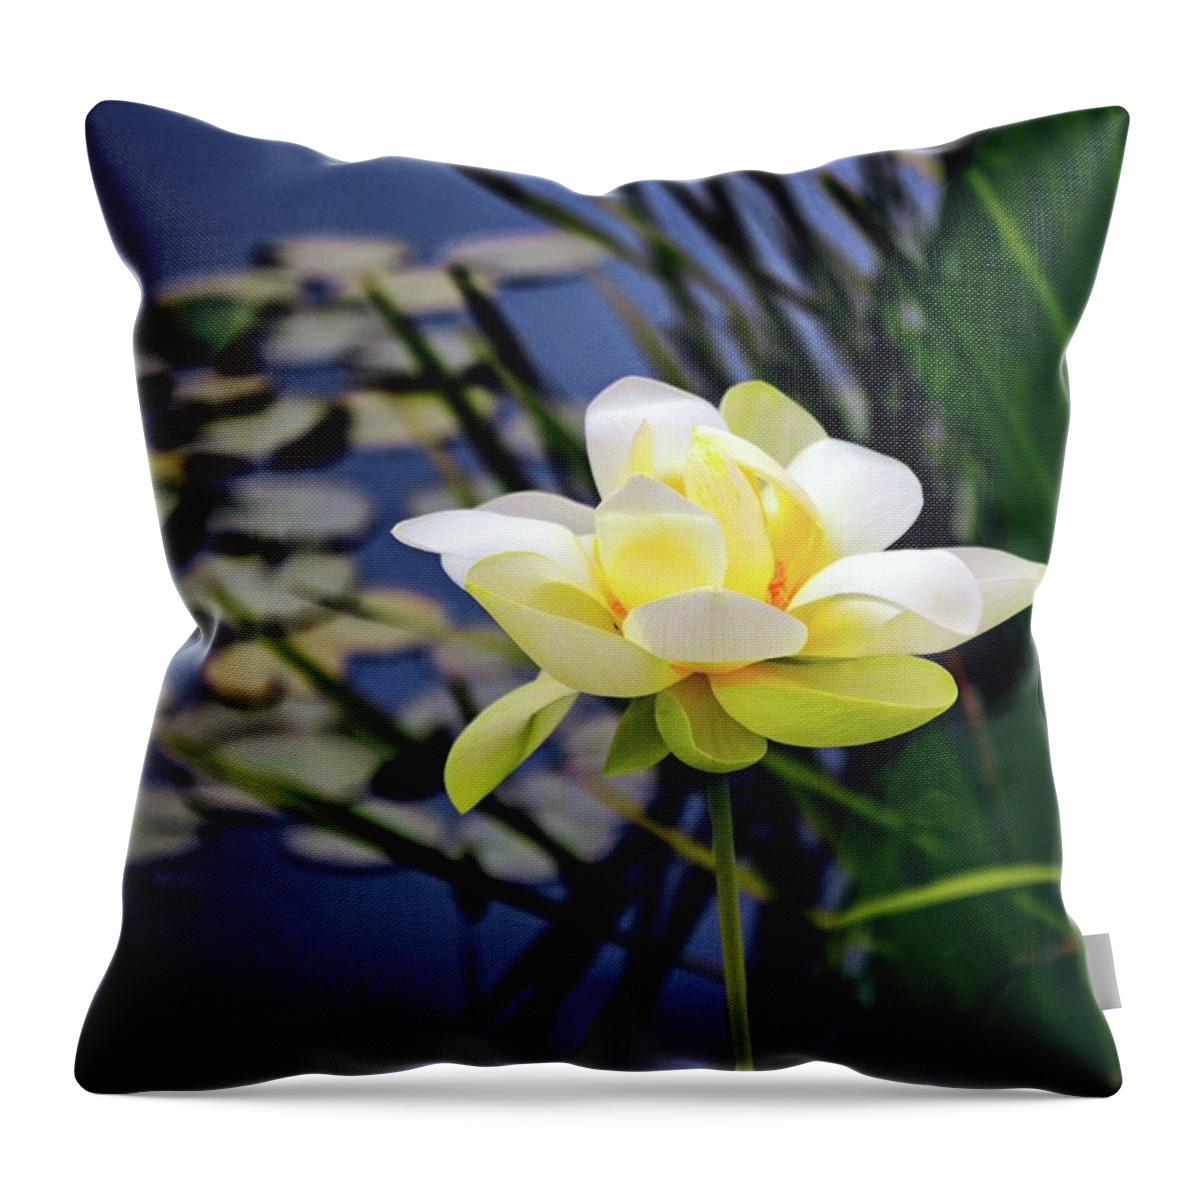 Lotus Throw Pillow featuring the photograph Lovely Lotus by Jessica Jenney